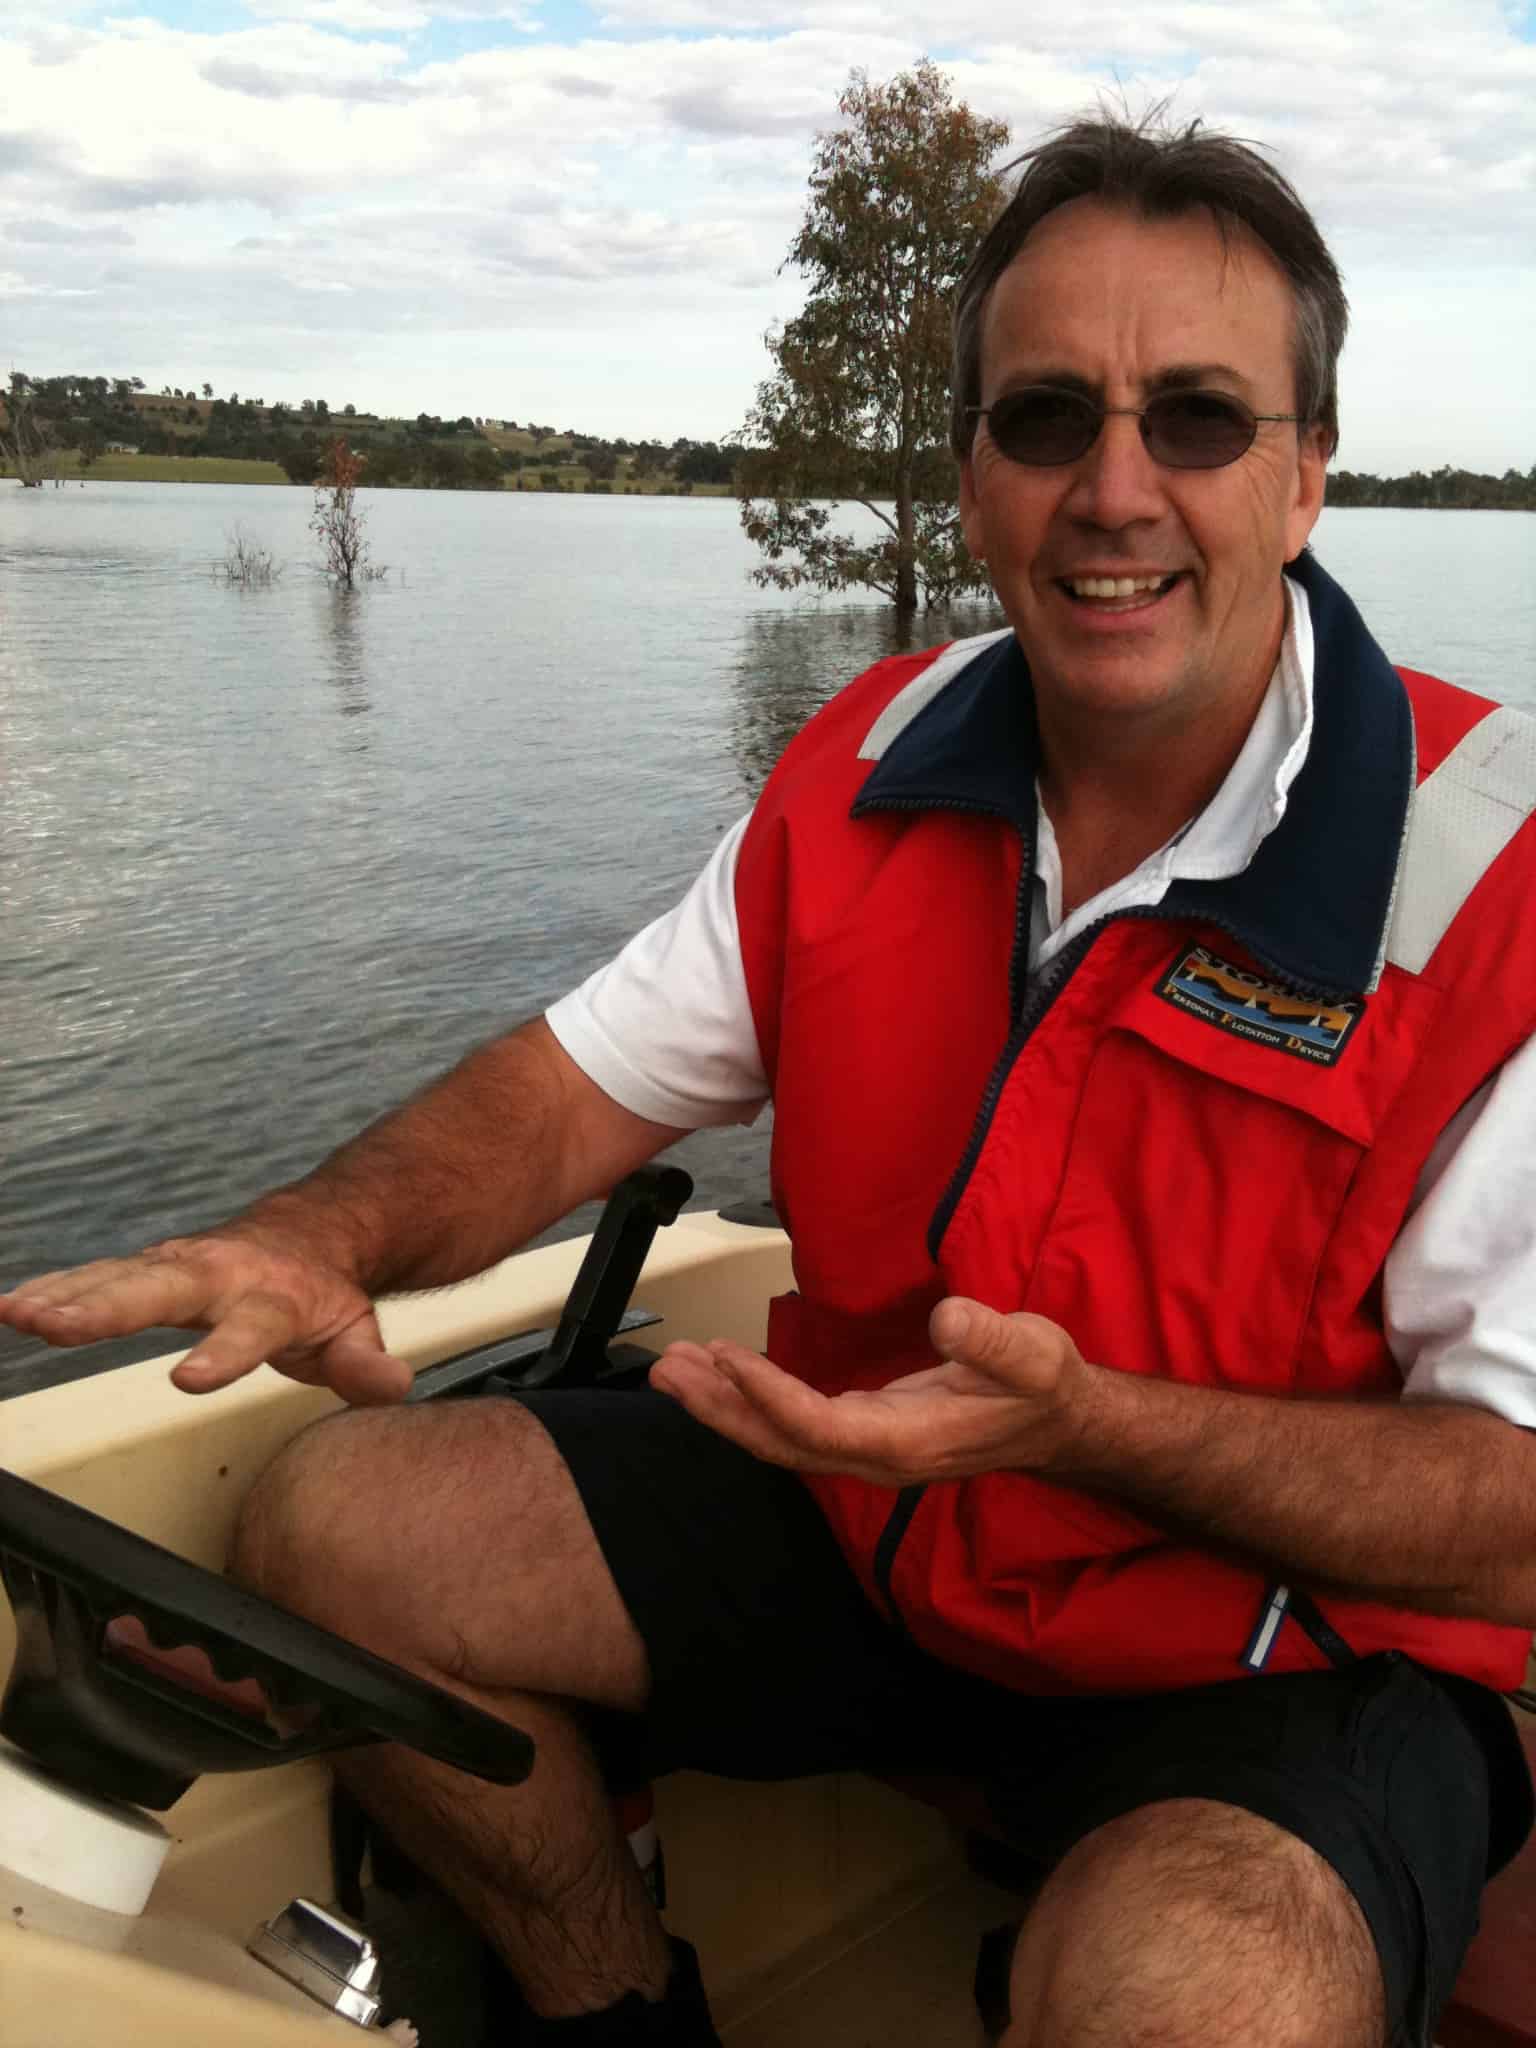 About Kevin Lewis - Life Jacket Safety